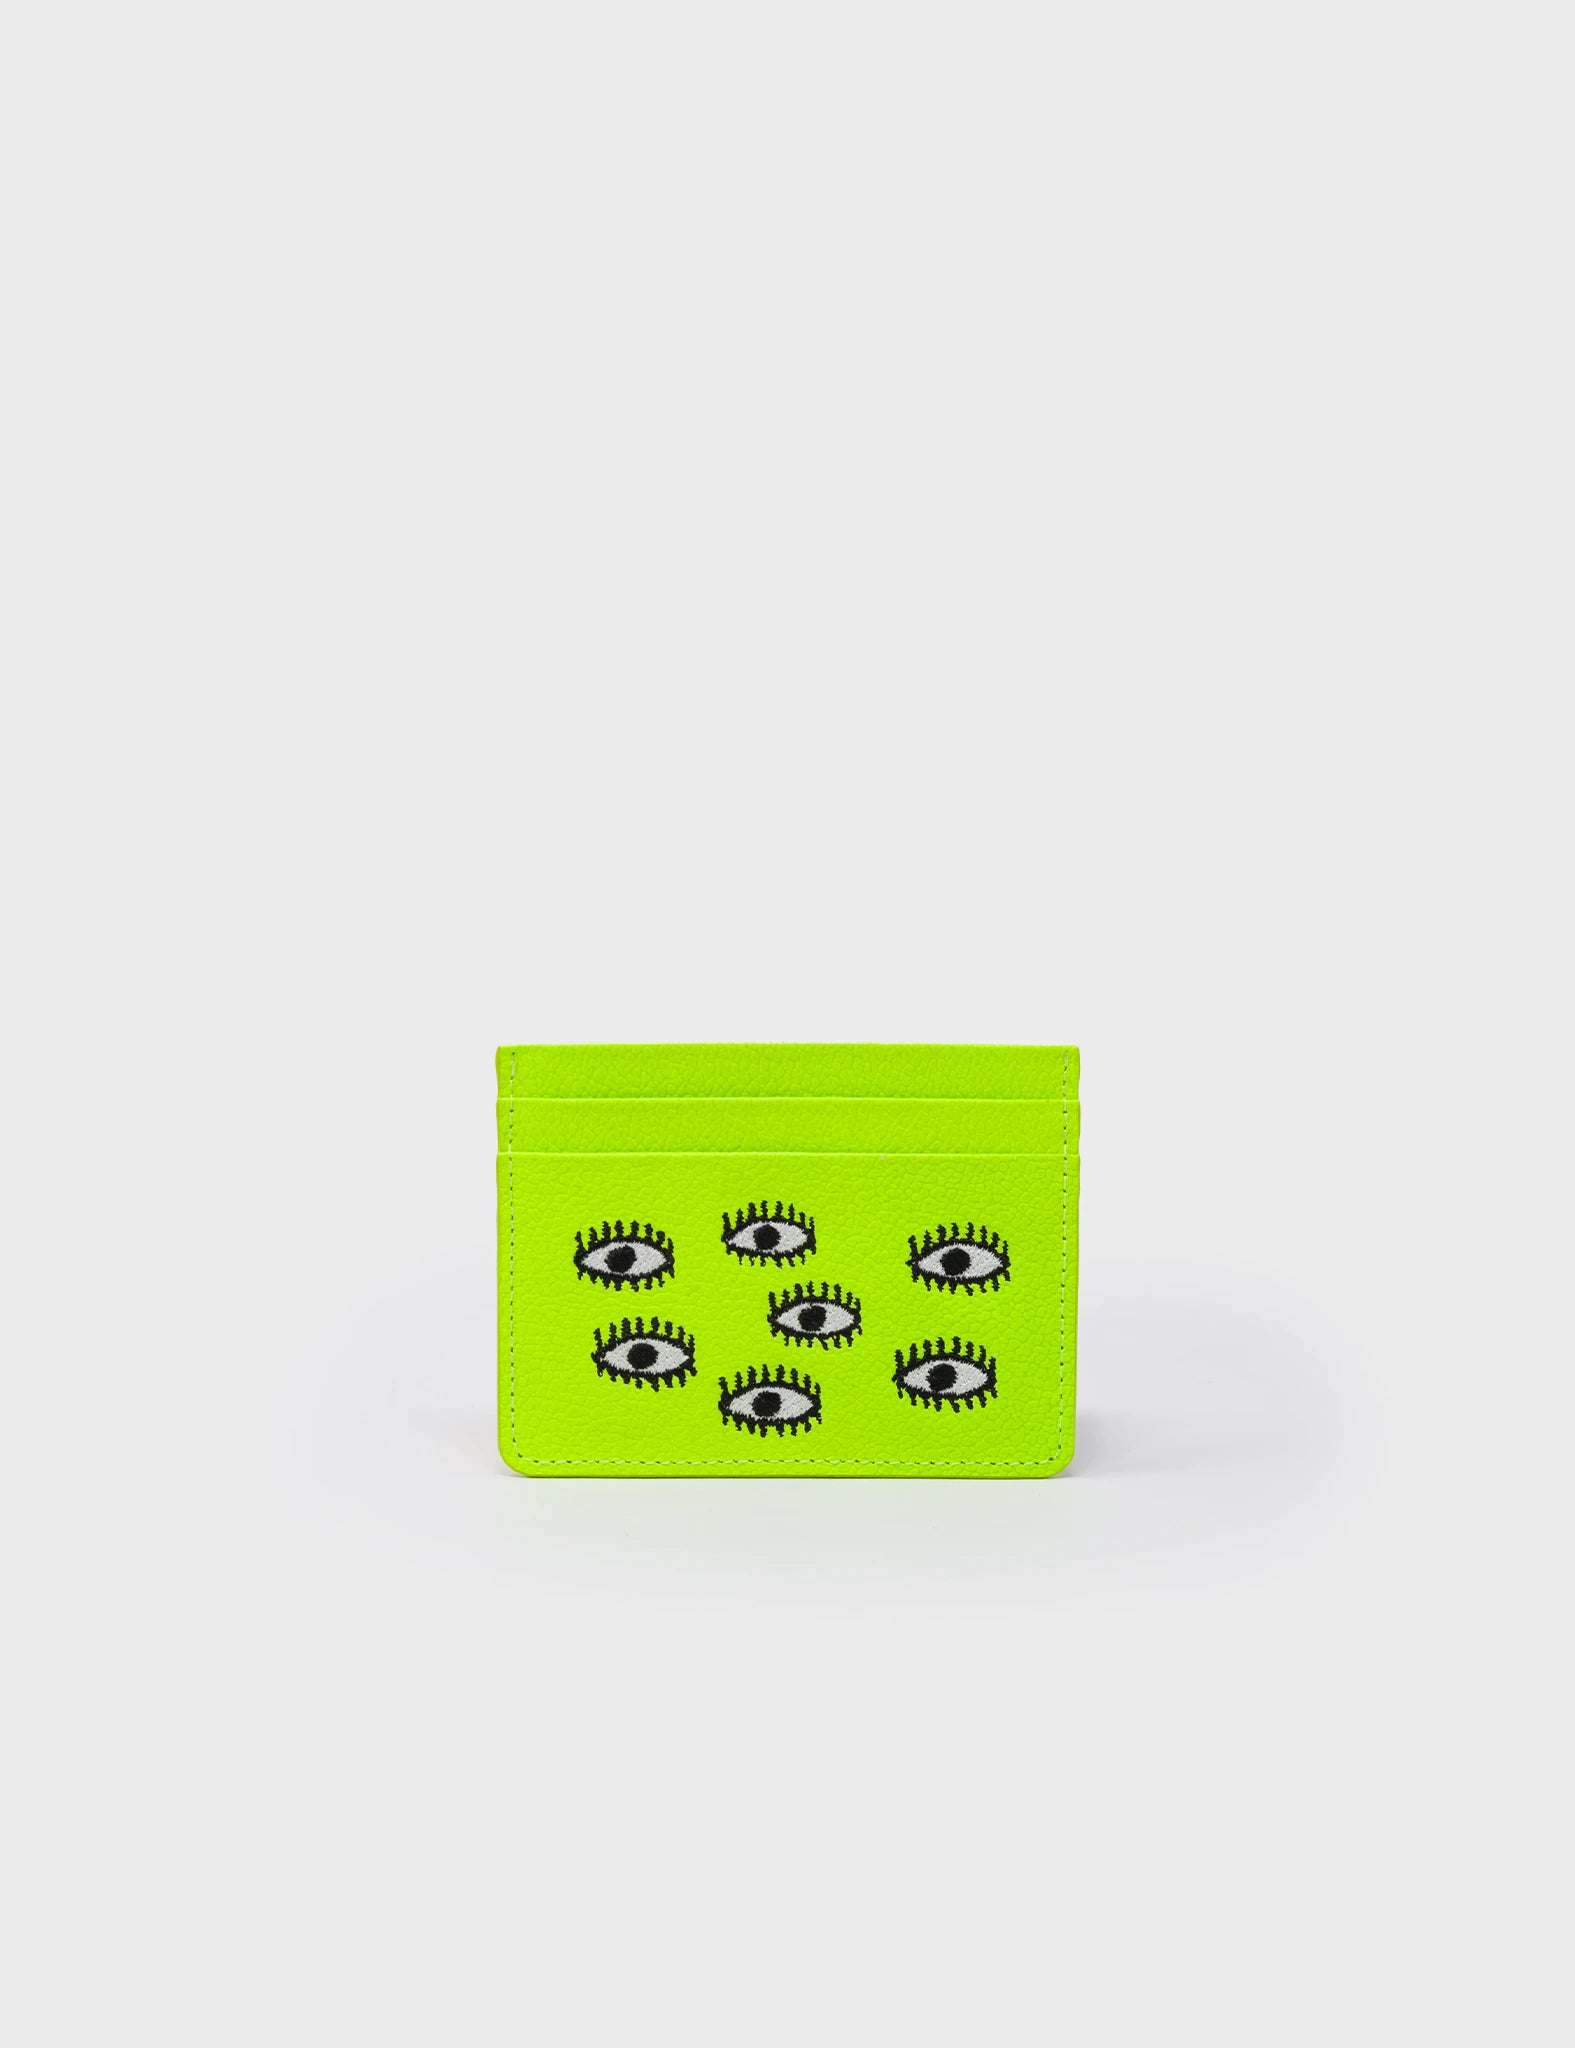 Filium Neon Yellow Leather Cardholder - All Over Eyes Embroidery